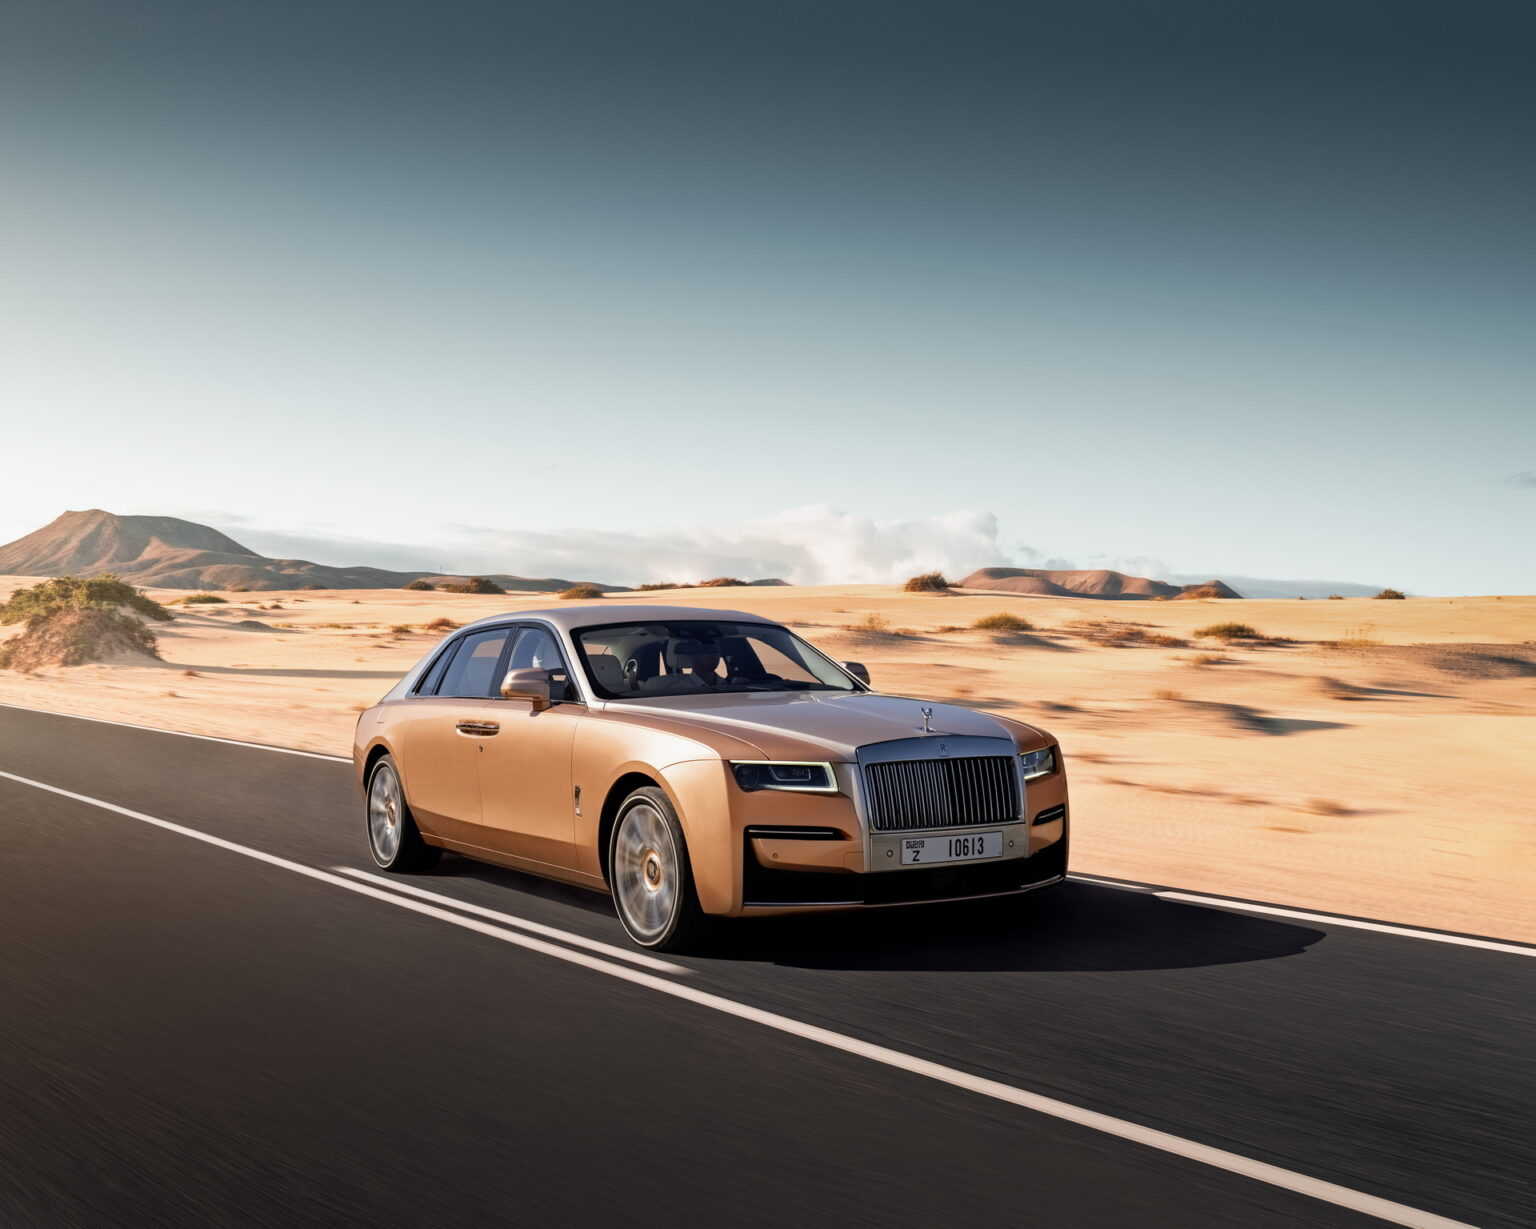 Bespoke Rolls-Royce Ghost Extended Is The First Project From Brand’s ...